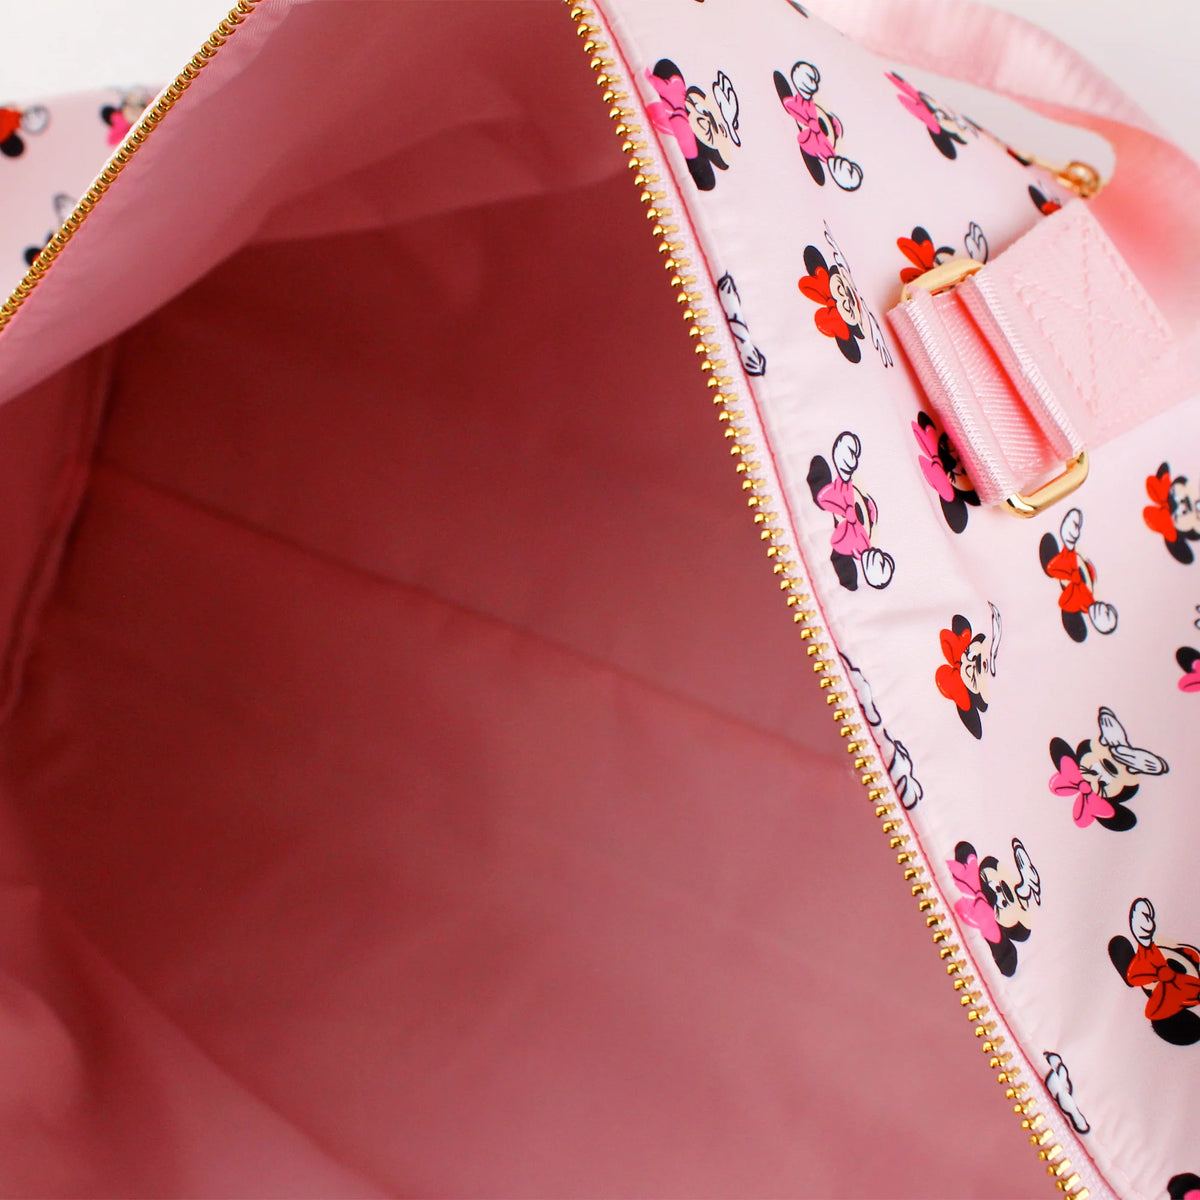 Minnie Mouse Expression Duffle Bag